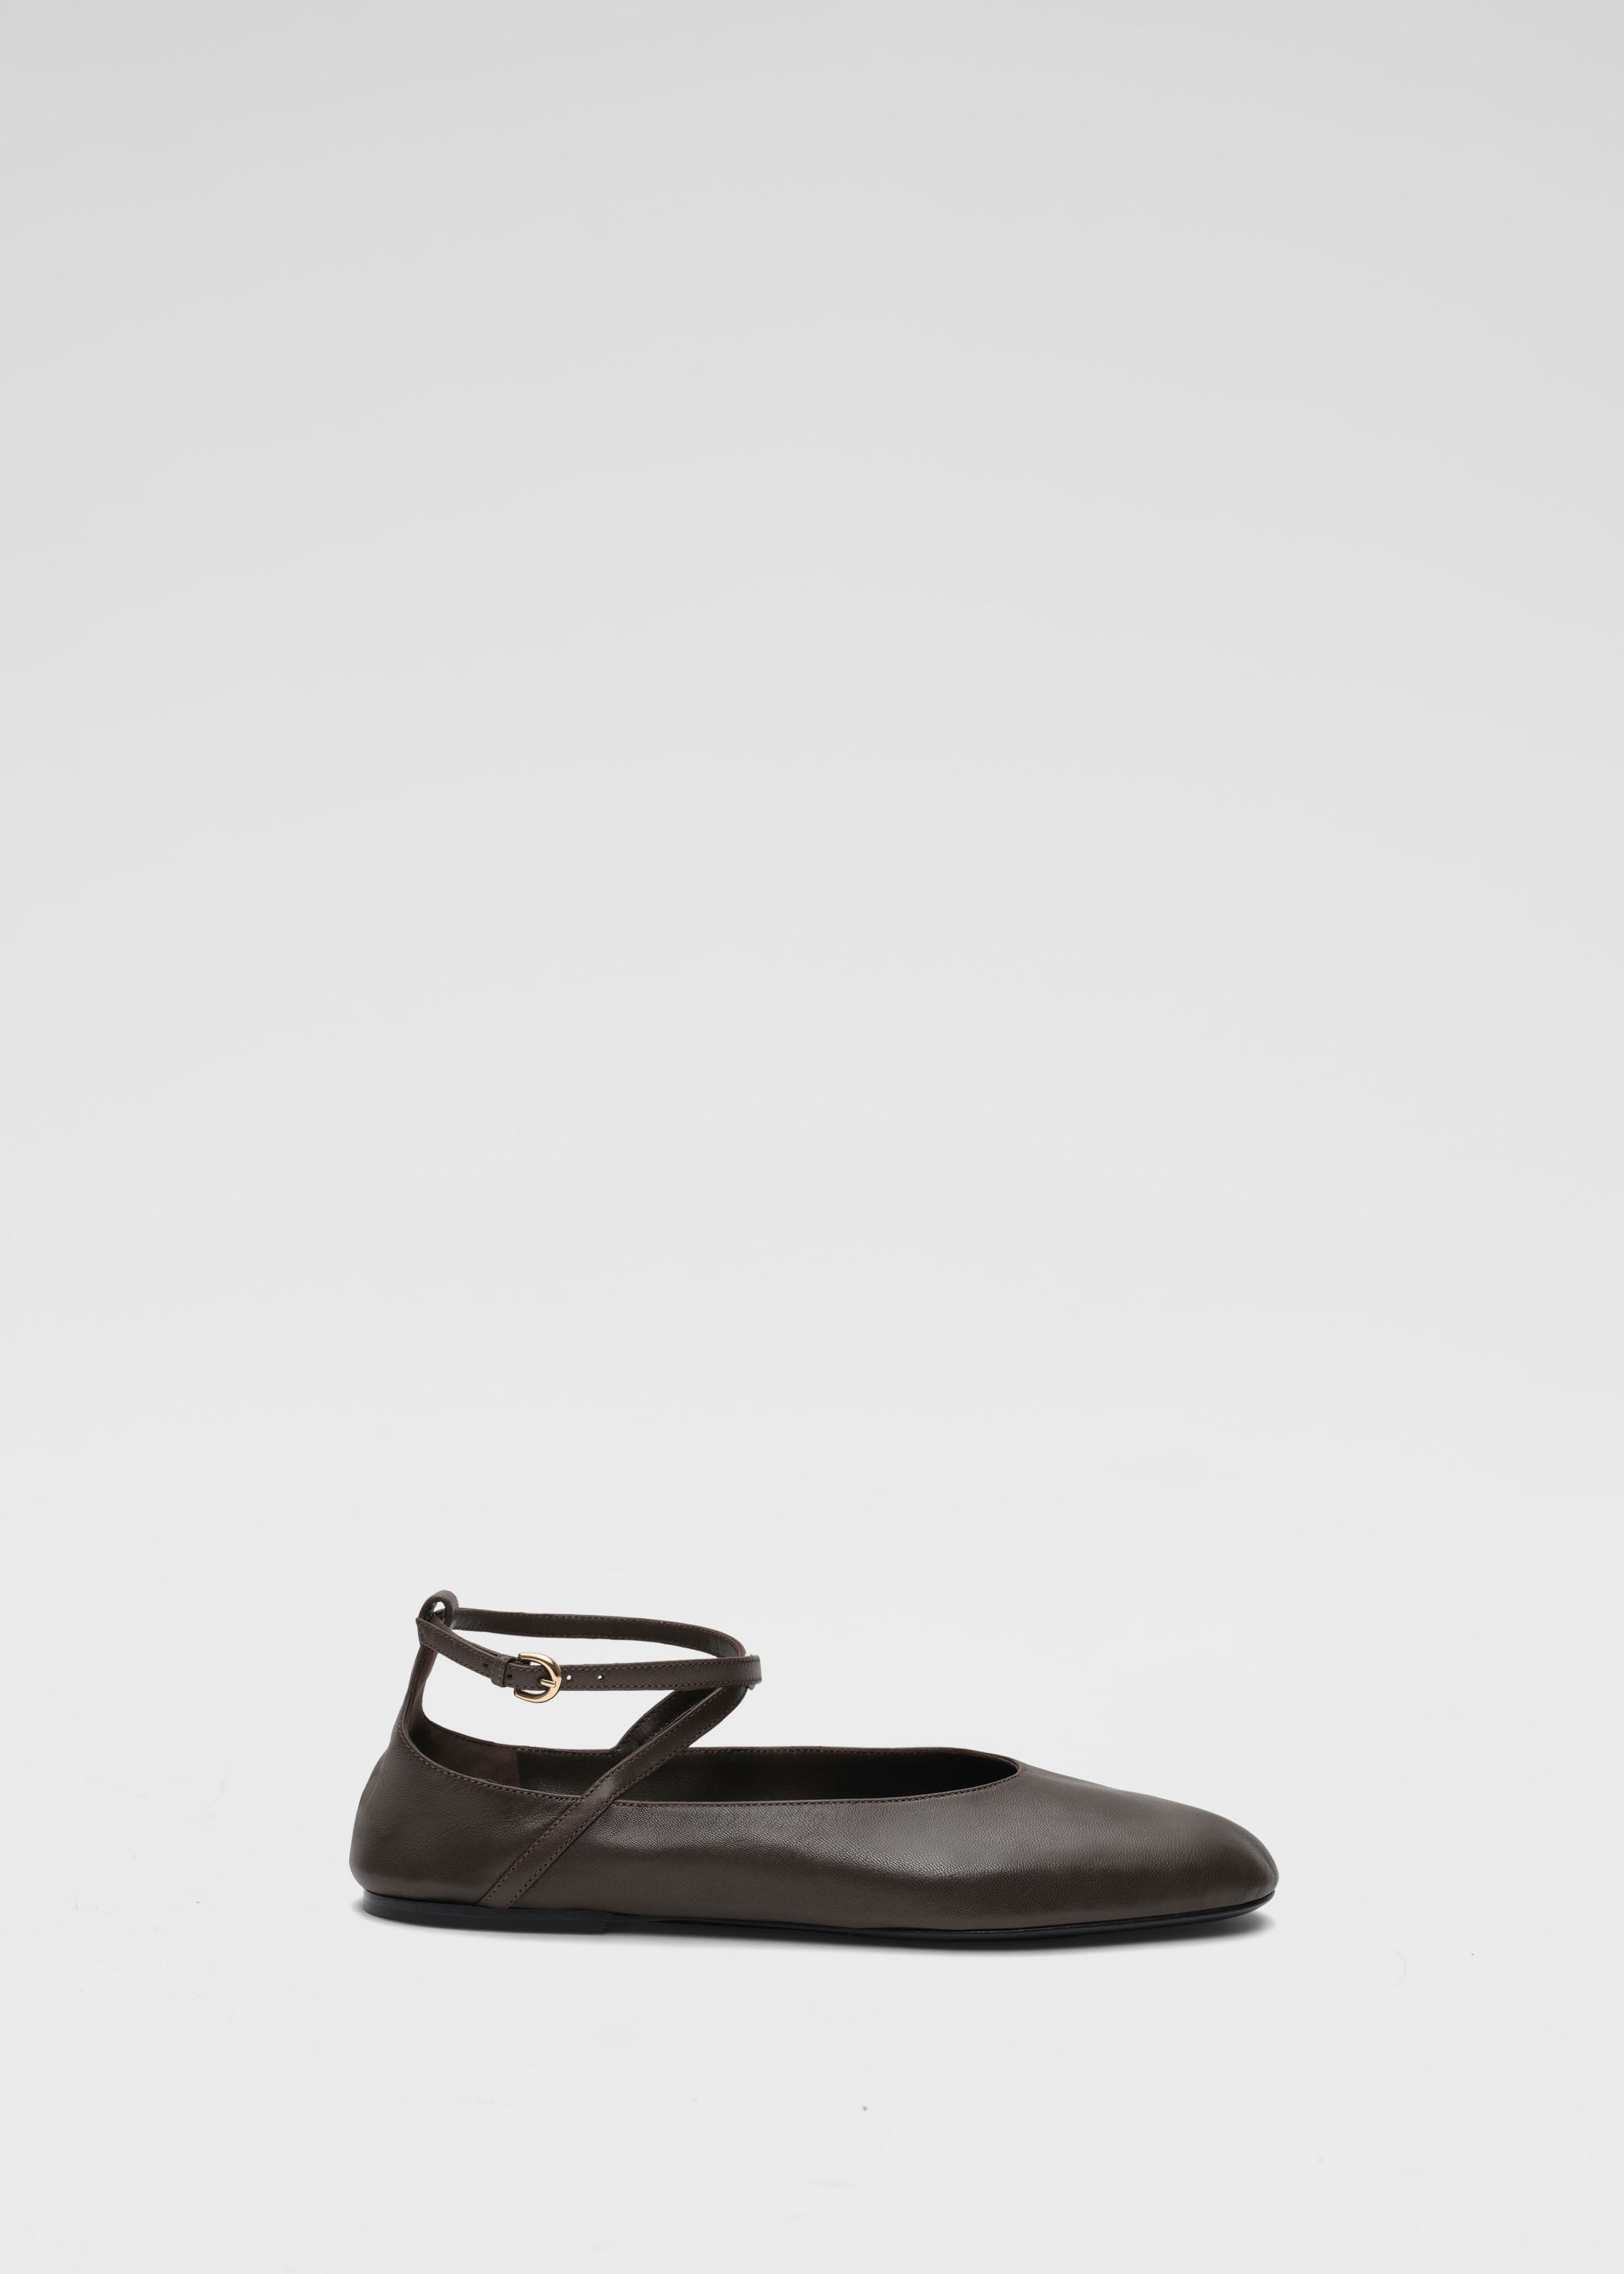 Ankle Strap Ballerina in Chiffon Leather - Espresso - CO Collections